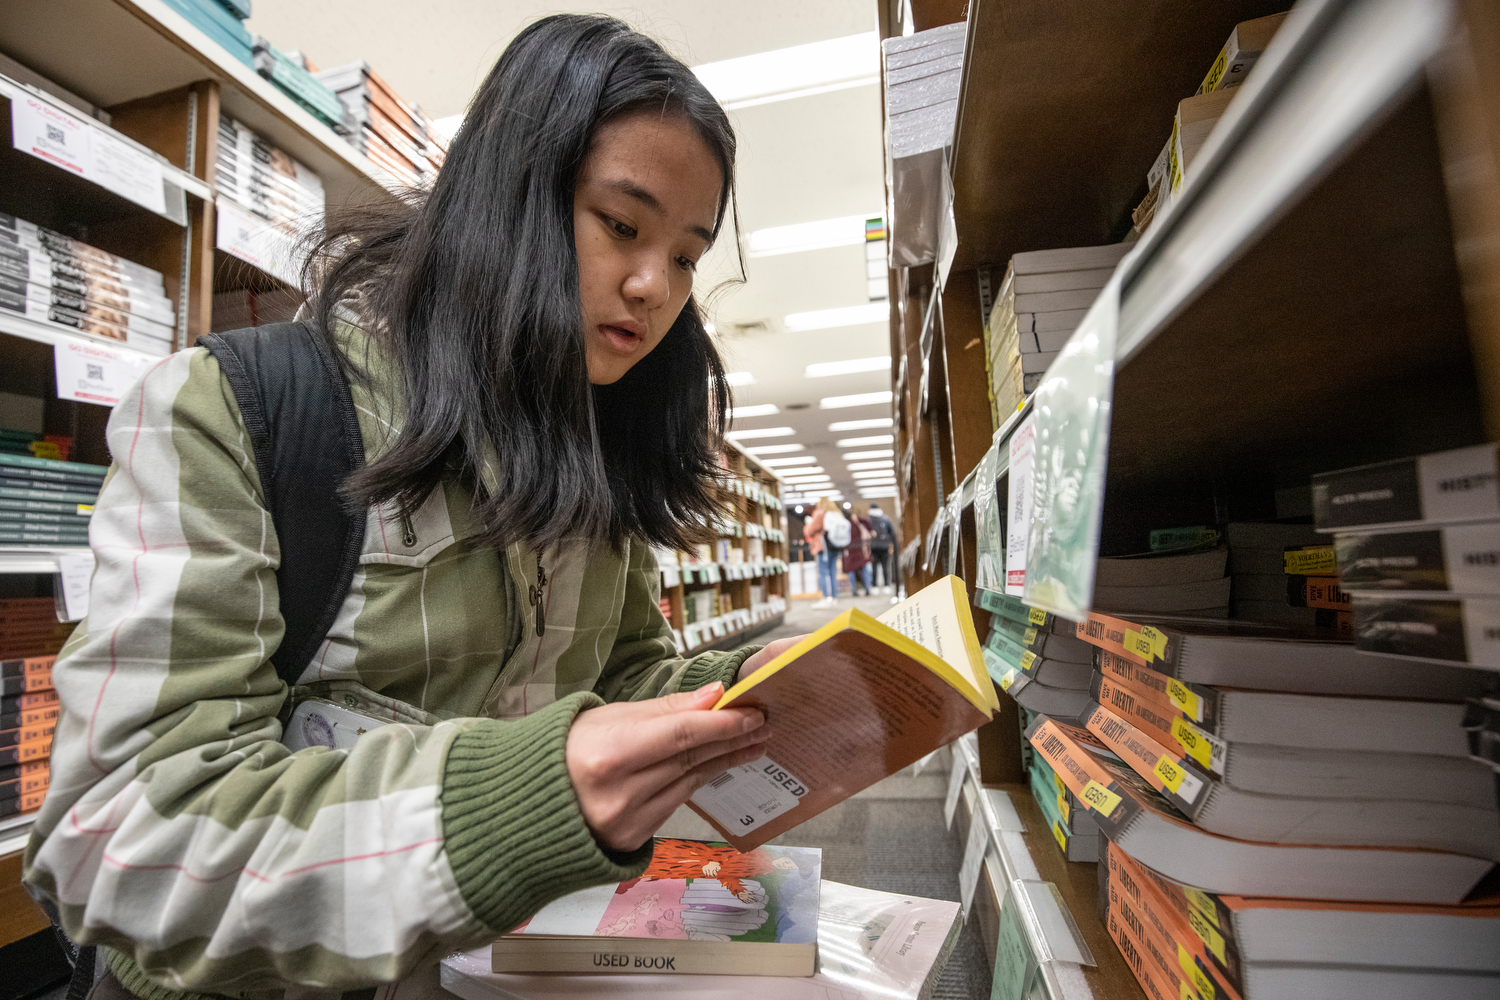 Transfer student Cathy Ouyang (EDU '22) looks at books for her history class at the bookstore in Student Center East during her first day on campus.